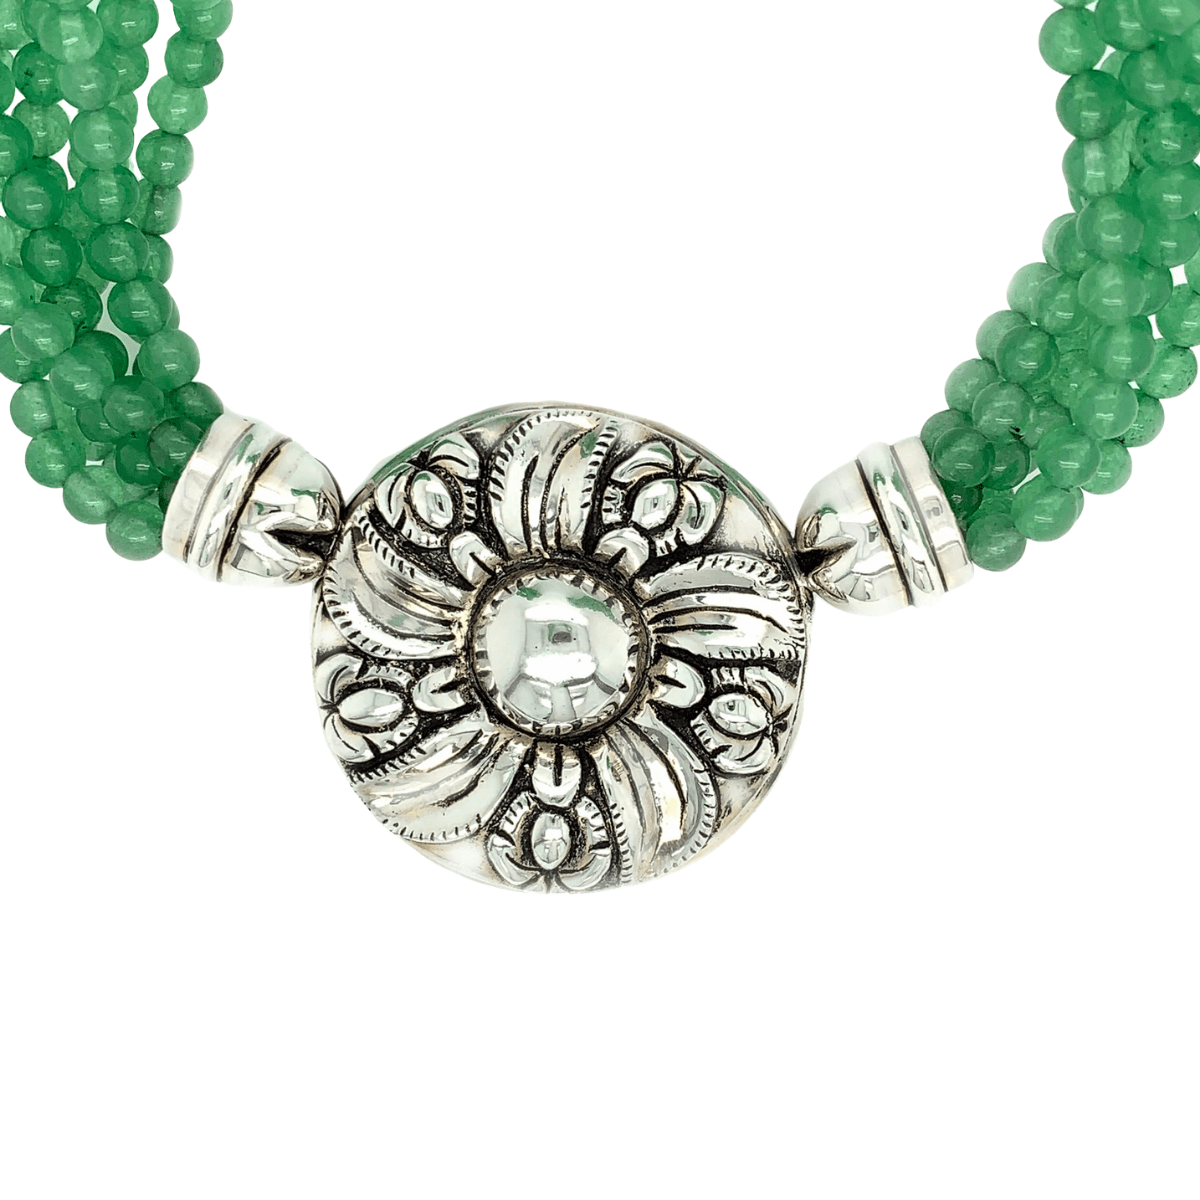 Green Jade Strands & Sterling Silver Colonial Flower Necklace - Qinti - The Peruvian Shop